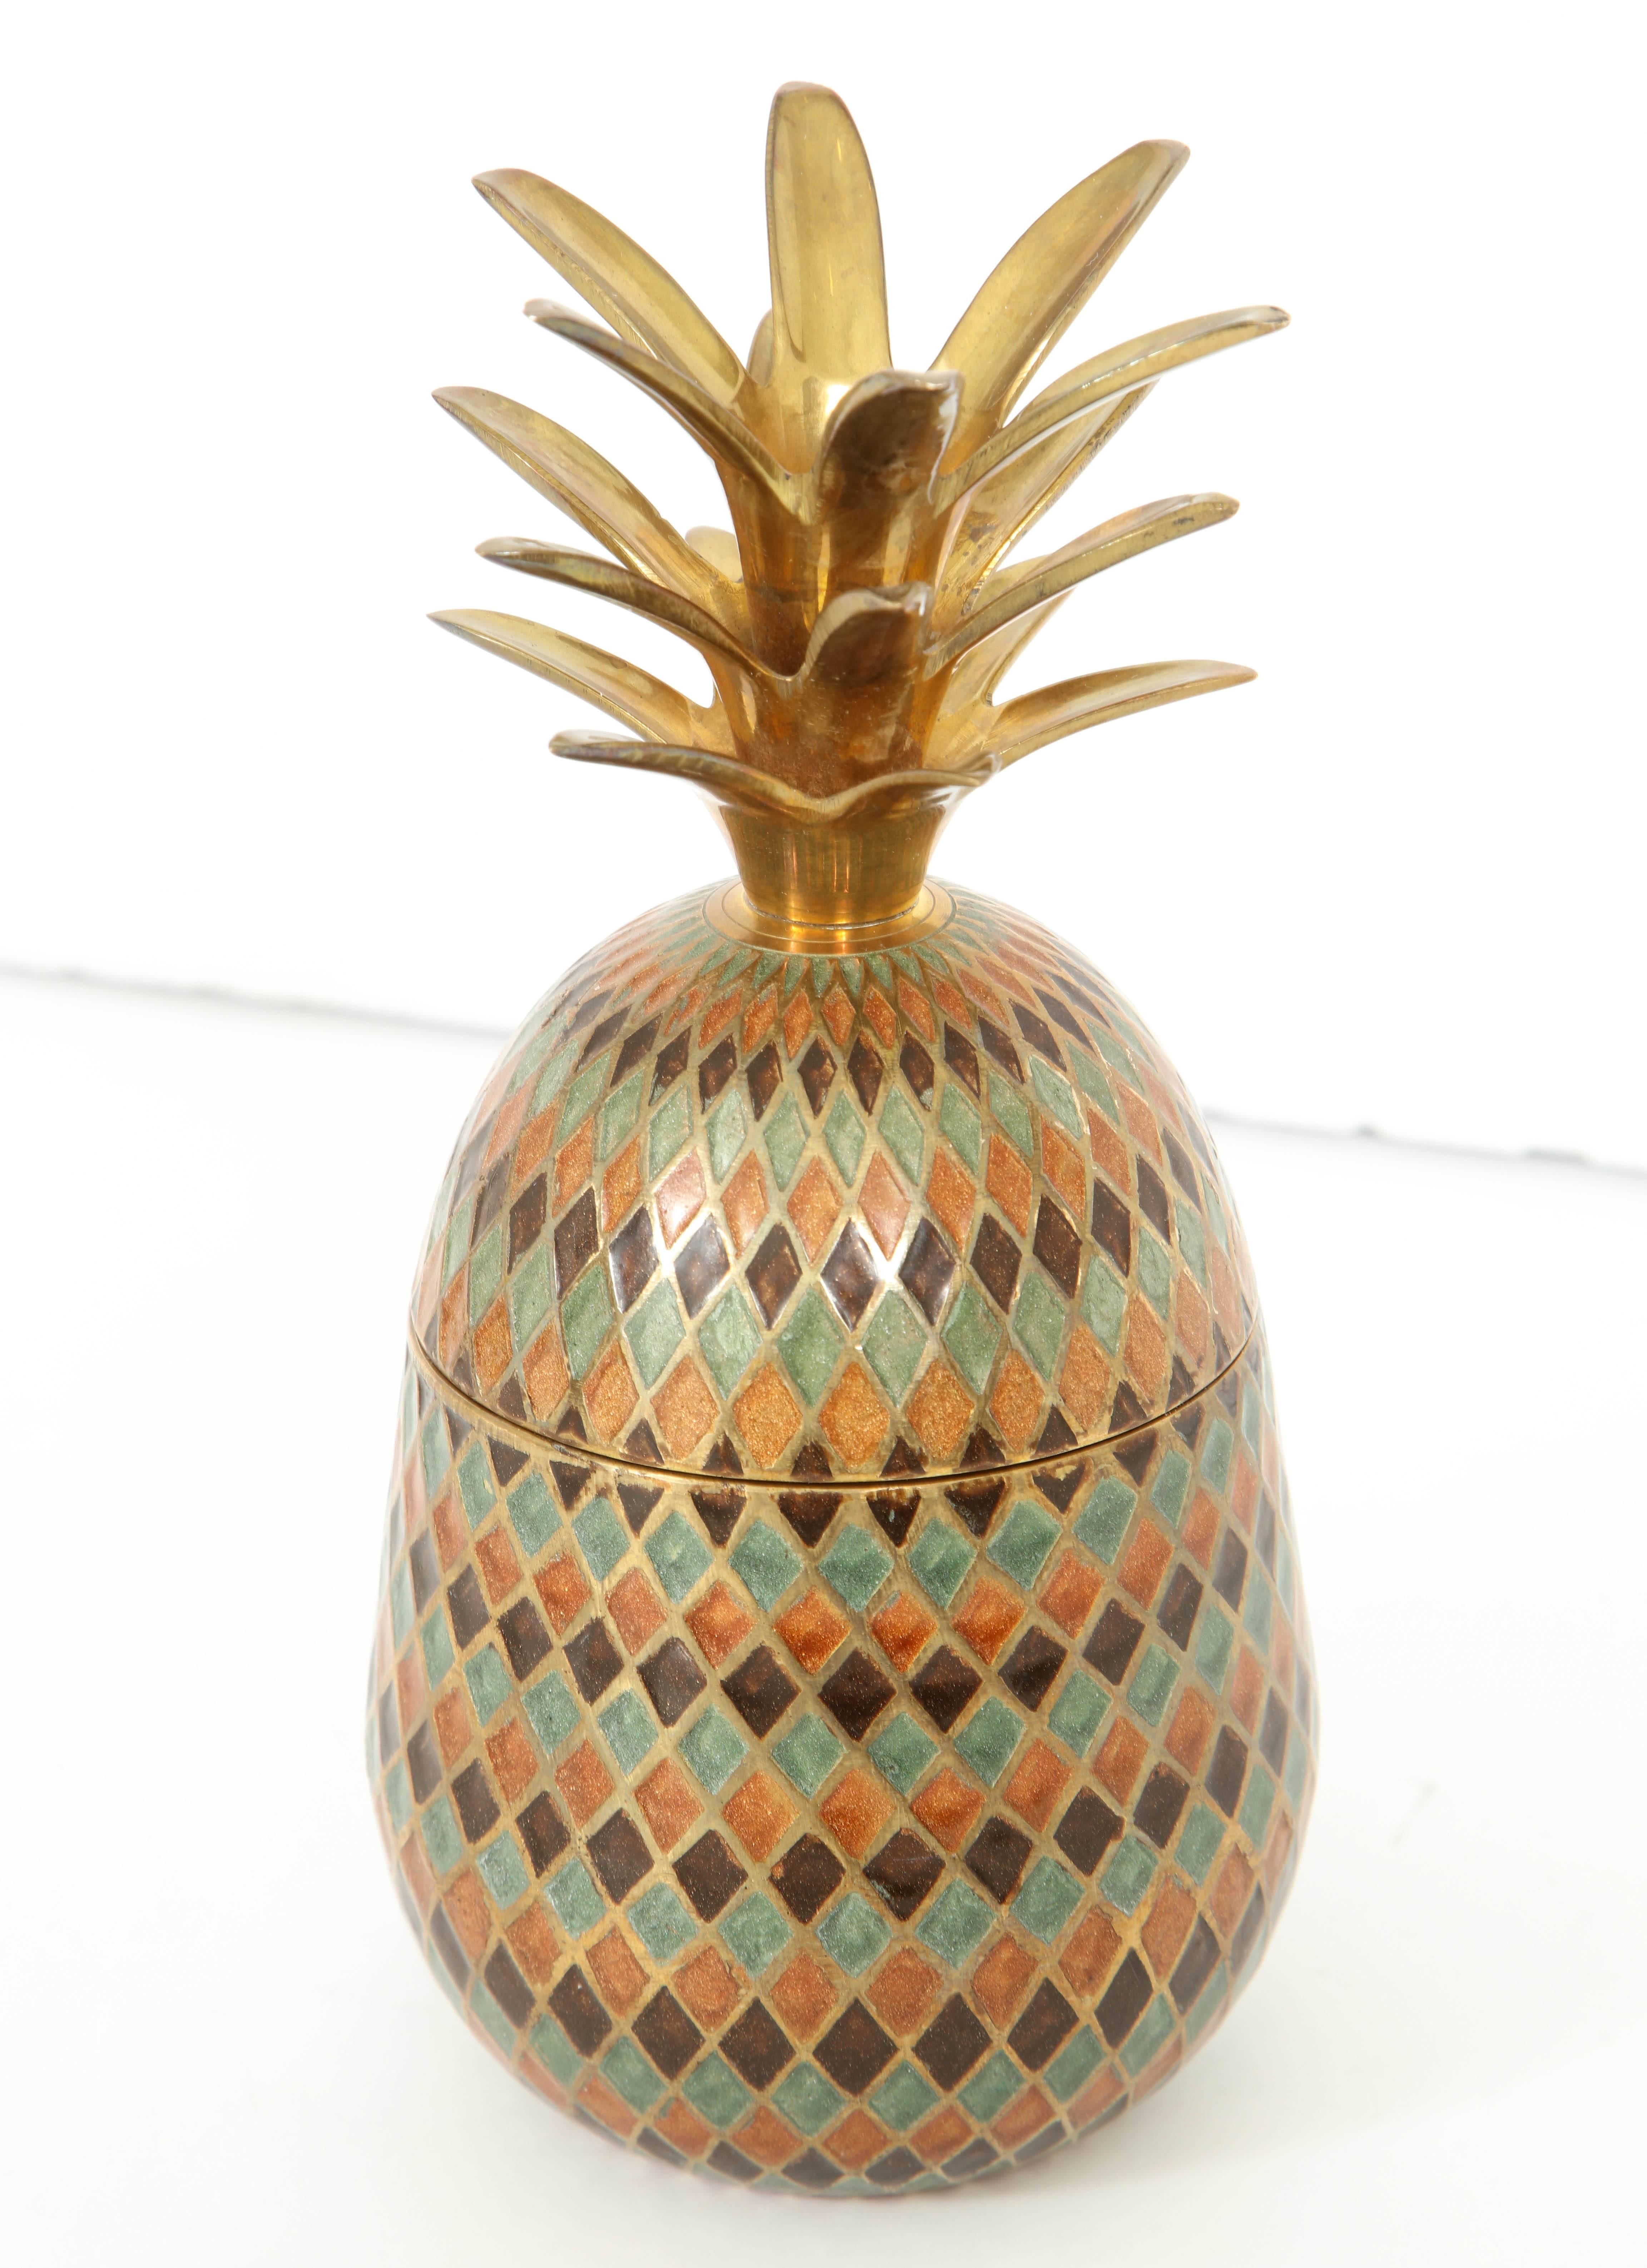 Pineapple ice bucket with a beautifully decorated Cloisonne diamond pattern.
The interior of the pineapple is polished brass and holds a single bottle.